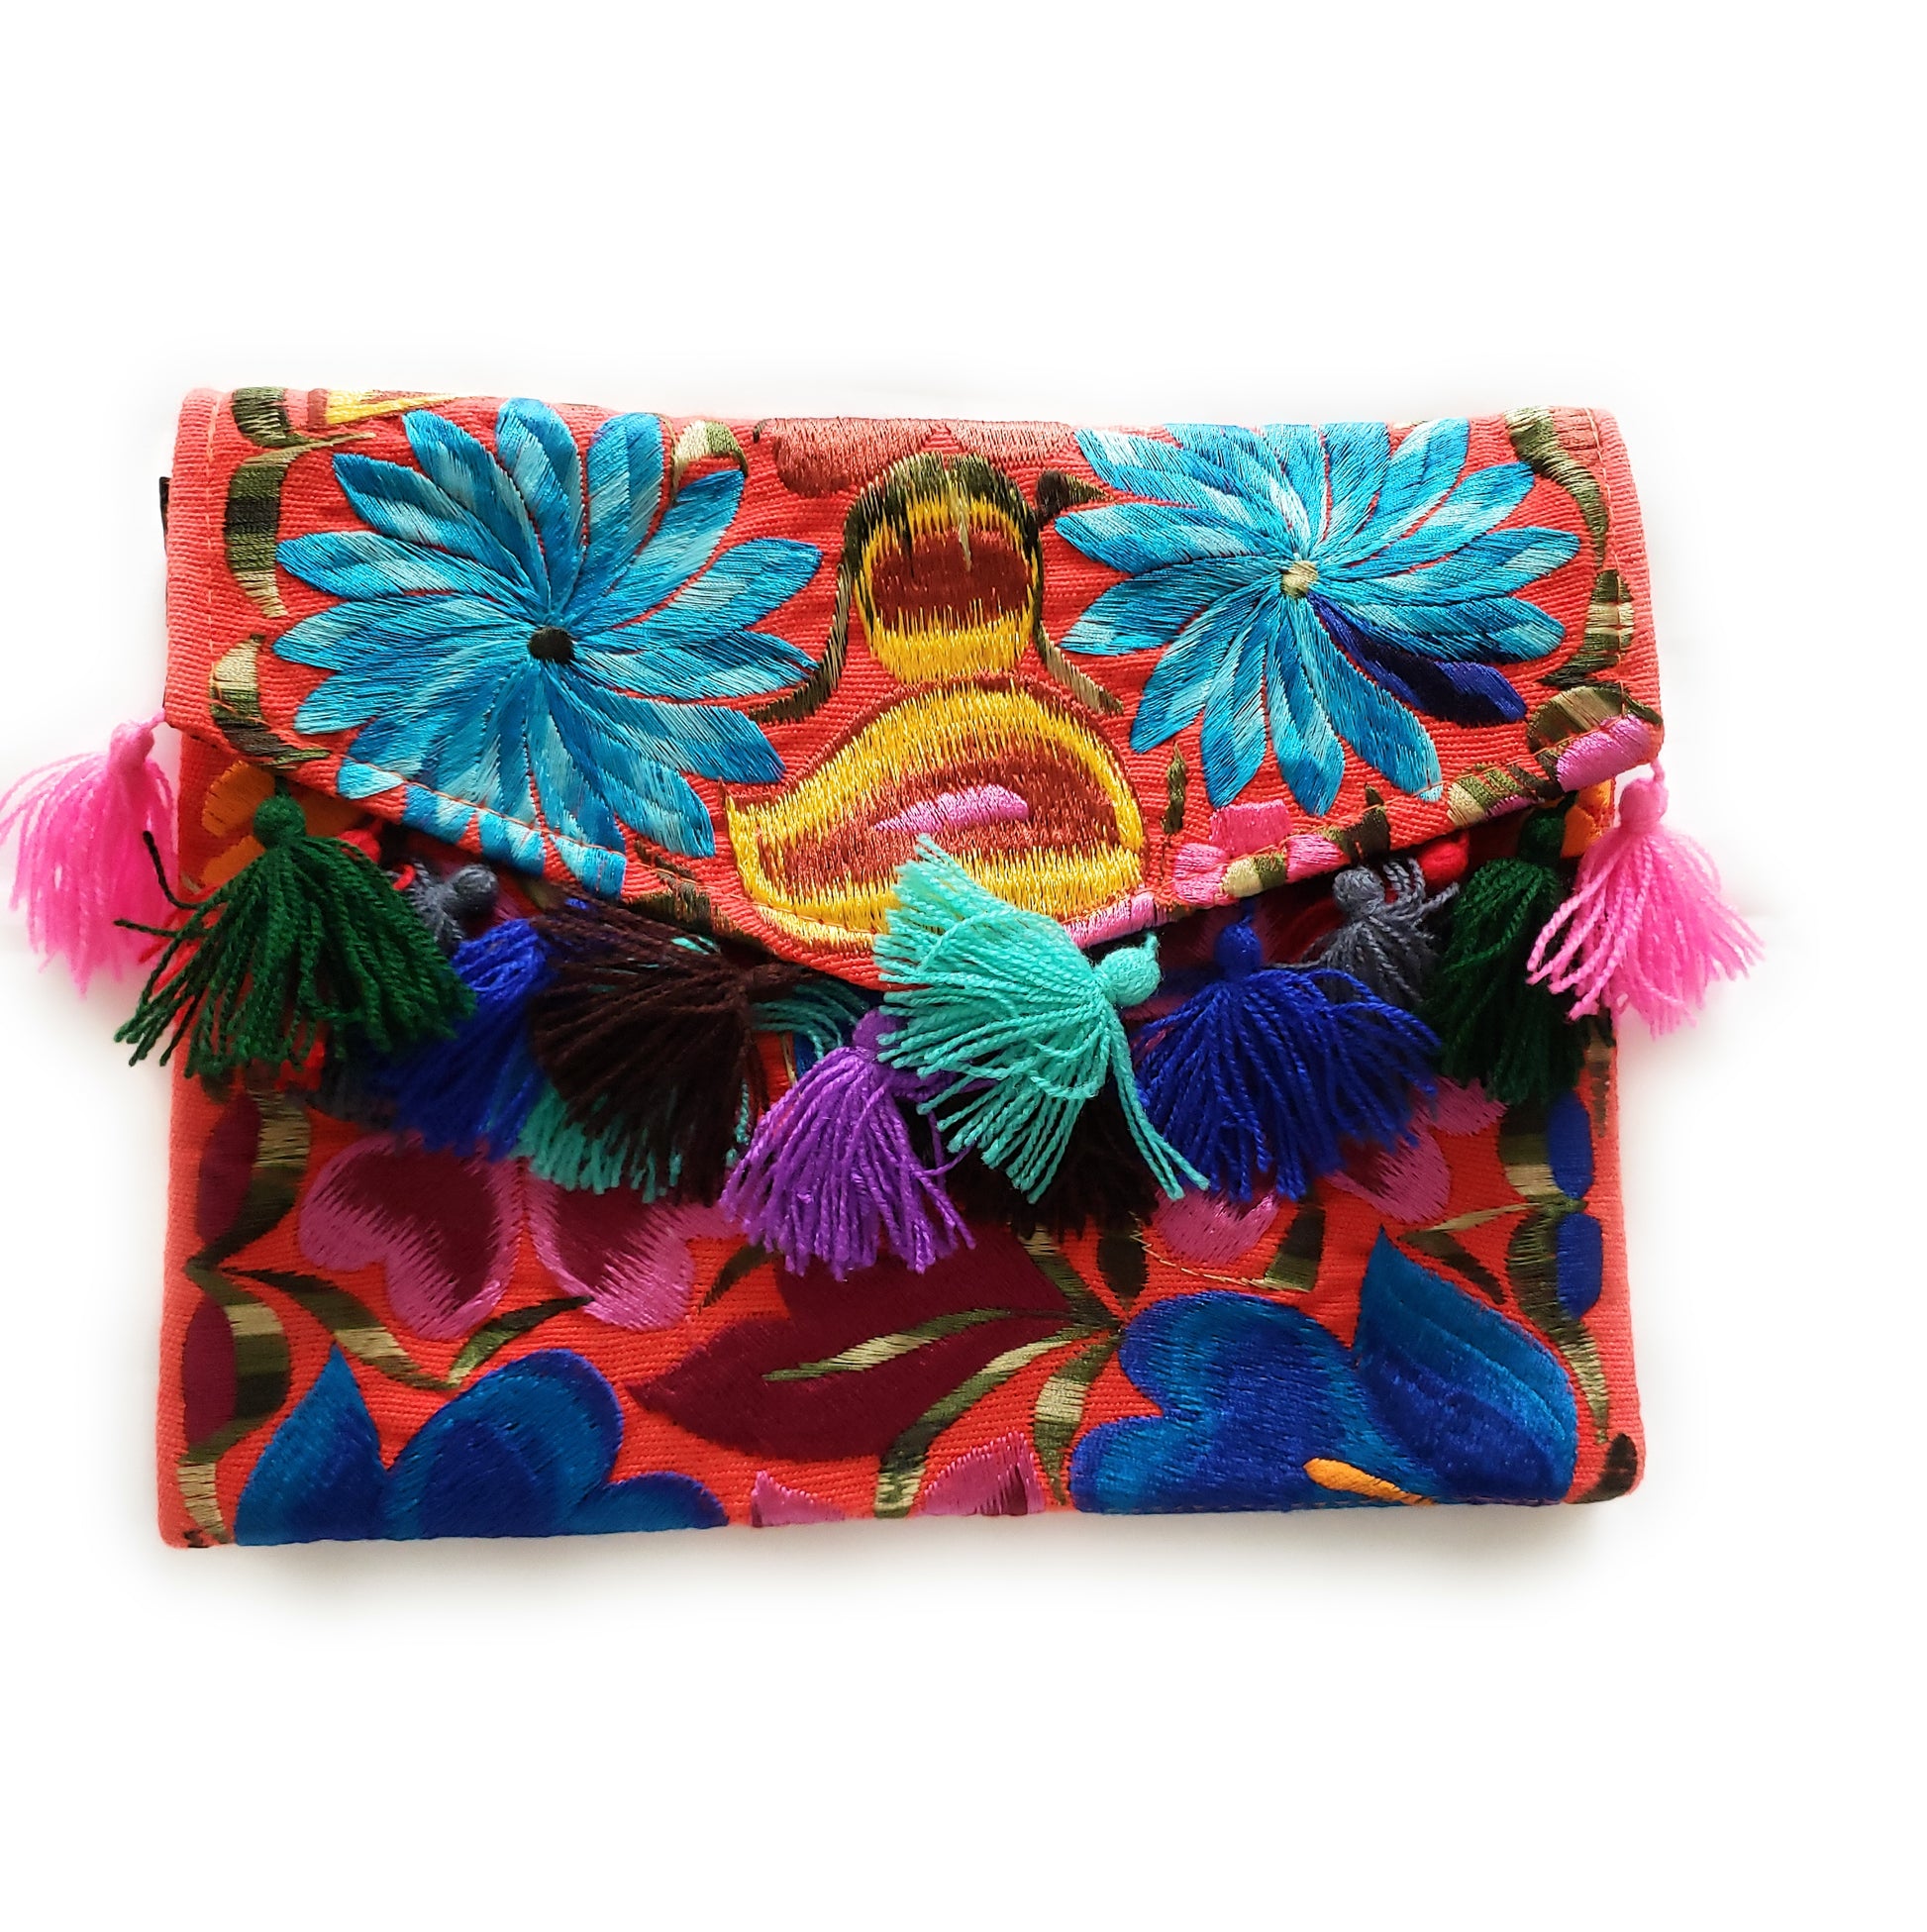 Mexican Embroidered Clutch Bag With Tassels Handmade Colorful - The Little Pueblo